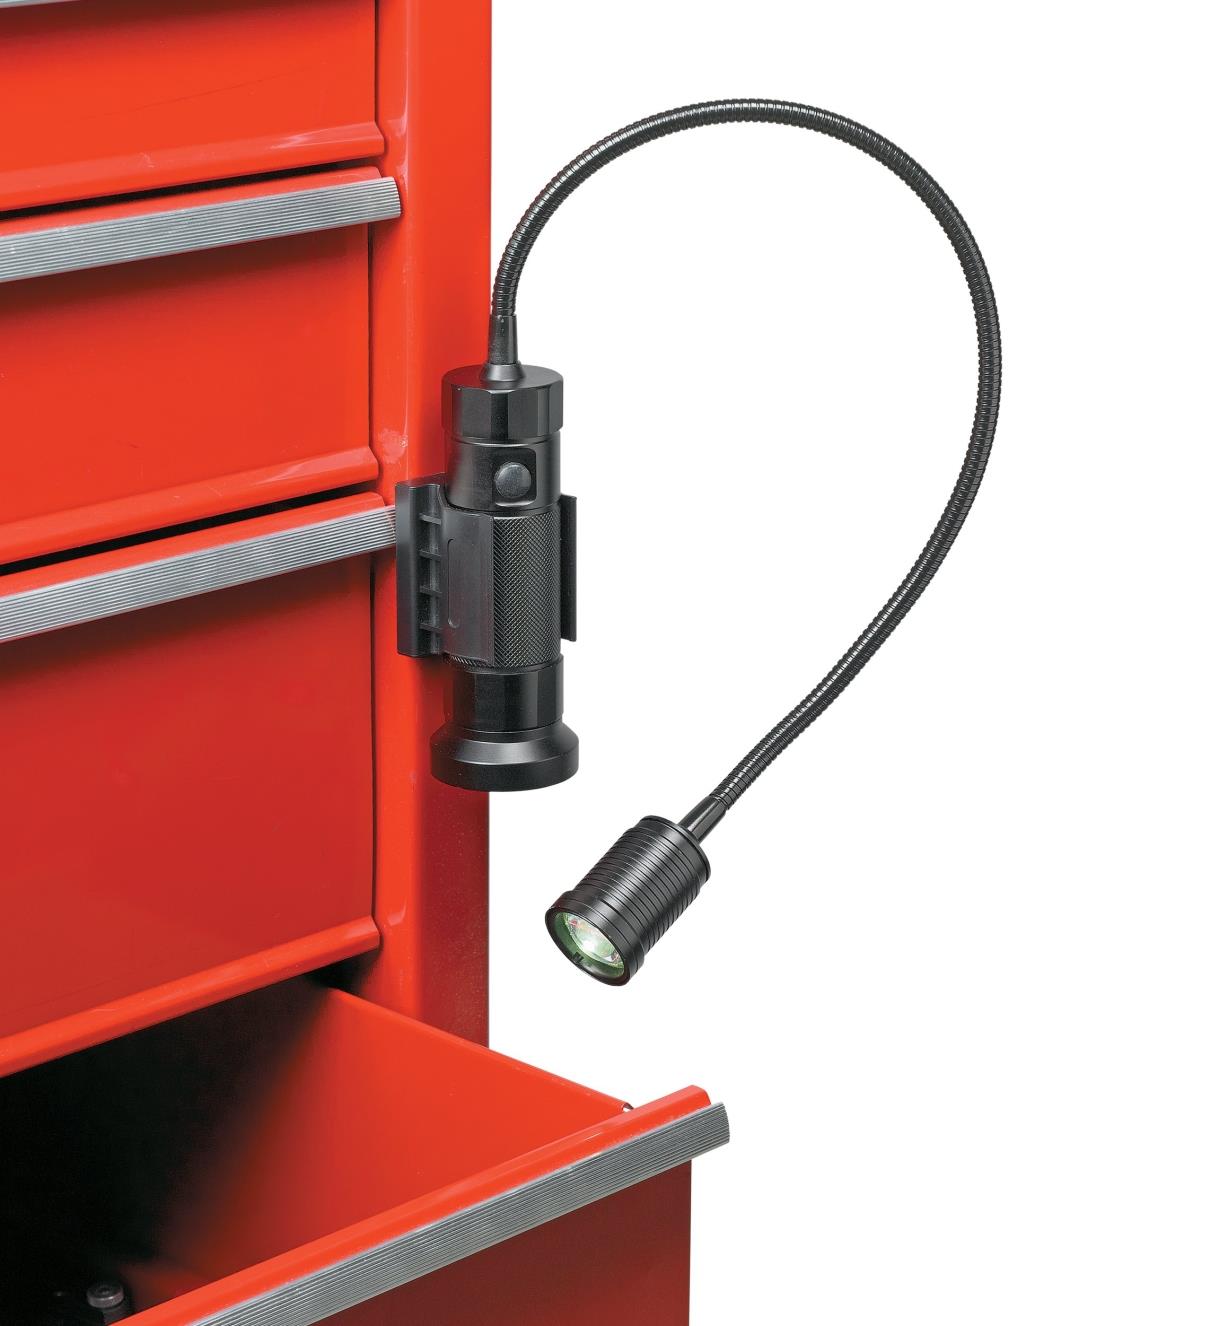 Magnetic-Mount LED Work Light mounted to a metal tool cabinet